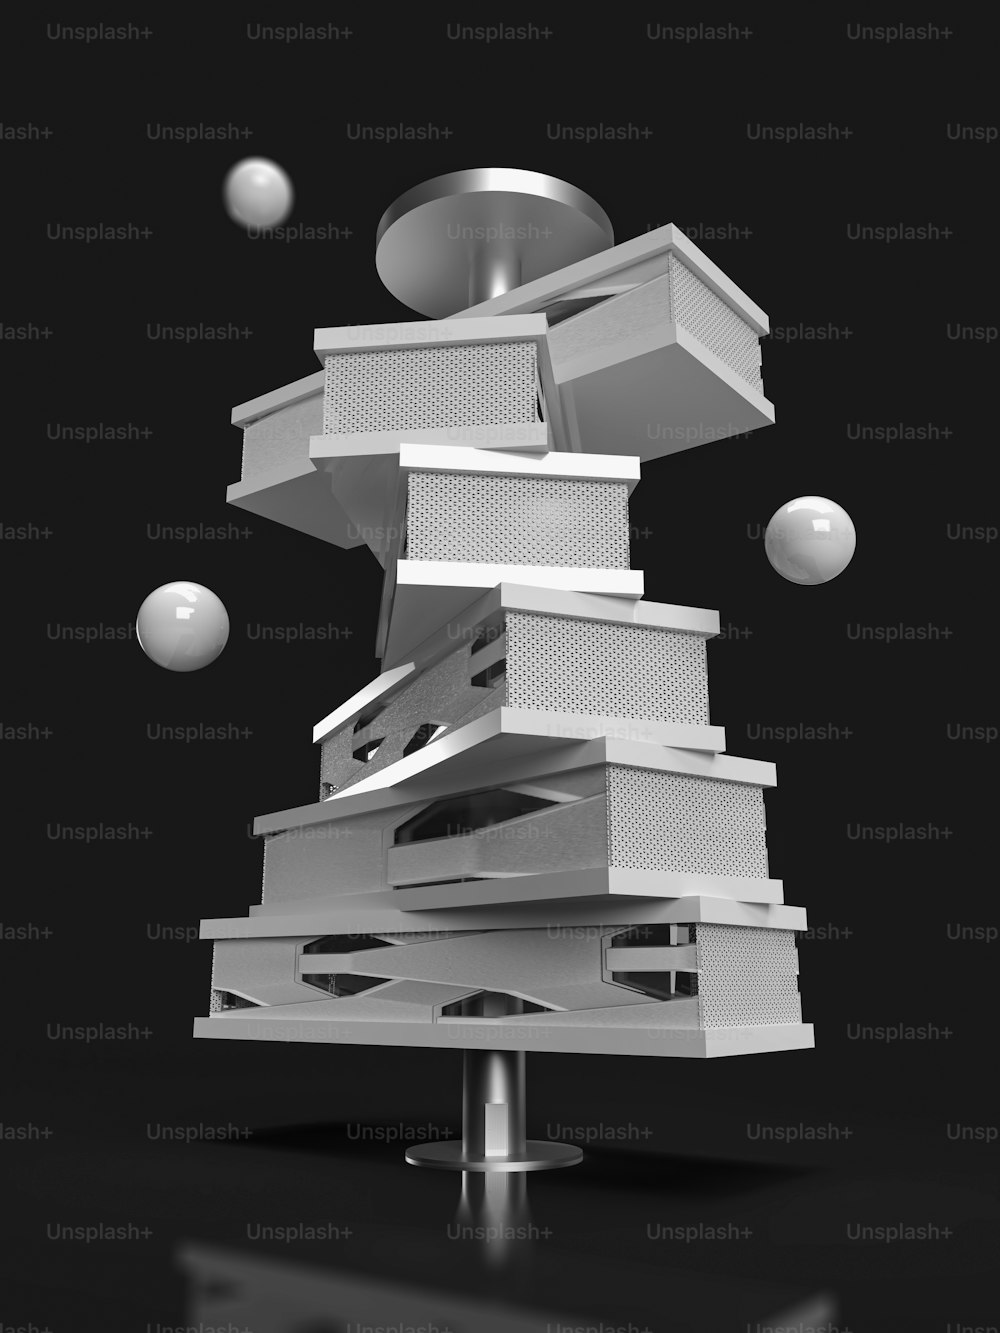 a model of a building with balls flying around it